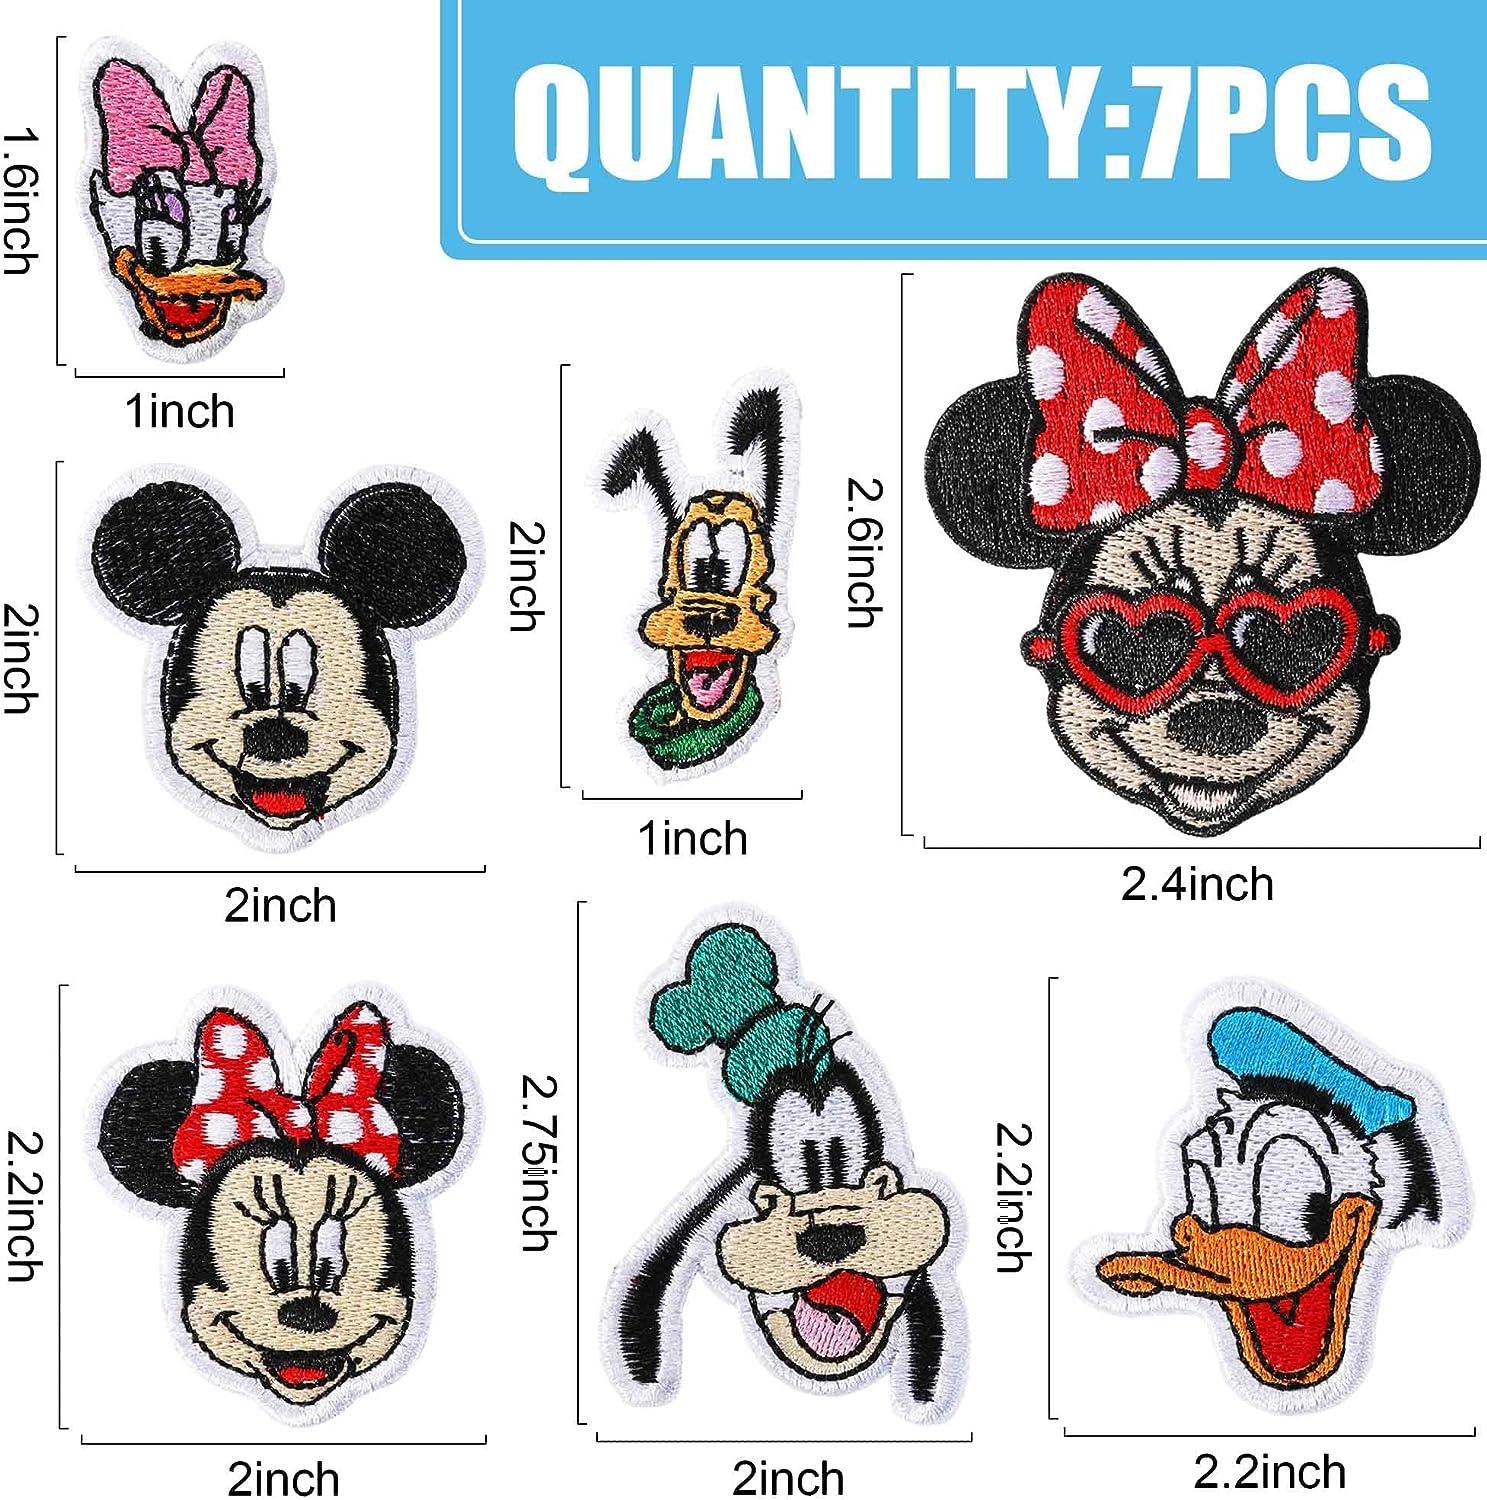 Disney Mickey Mouse Patch Embroidered Badge Iron Sew On Clothes Bag T Shirt  Cap